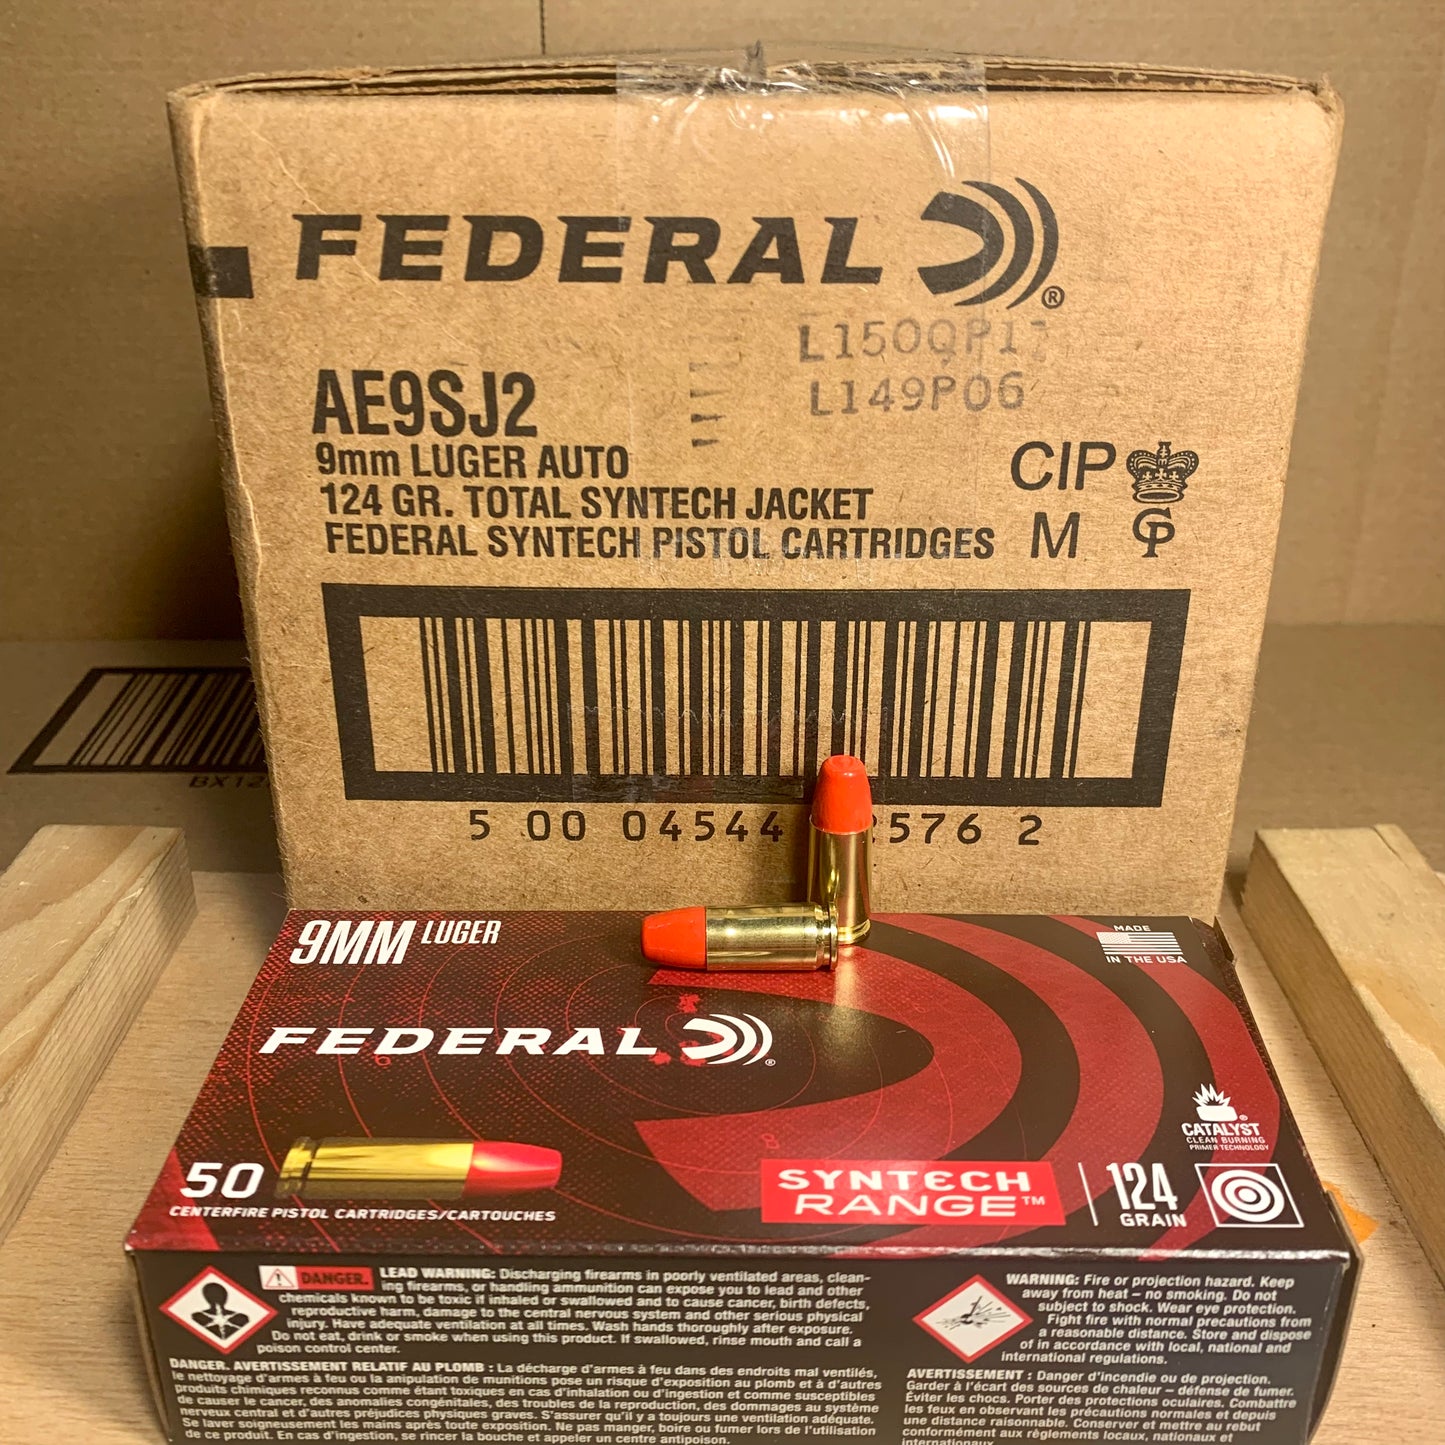 500 Round Case of Federal Syntech 9mm Luger Ammo 124gr Total Synthetic Jacket - AE9SJ2